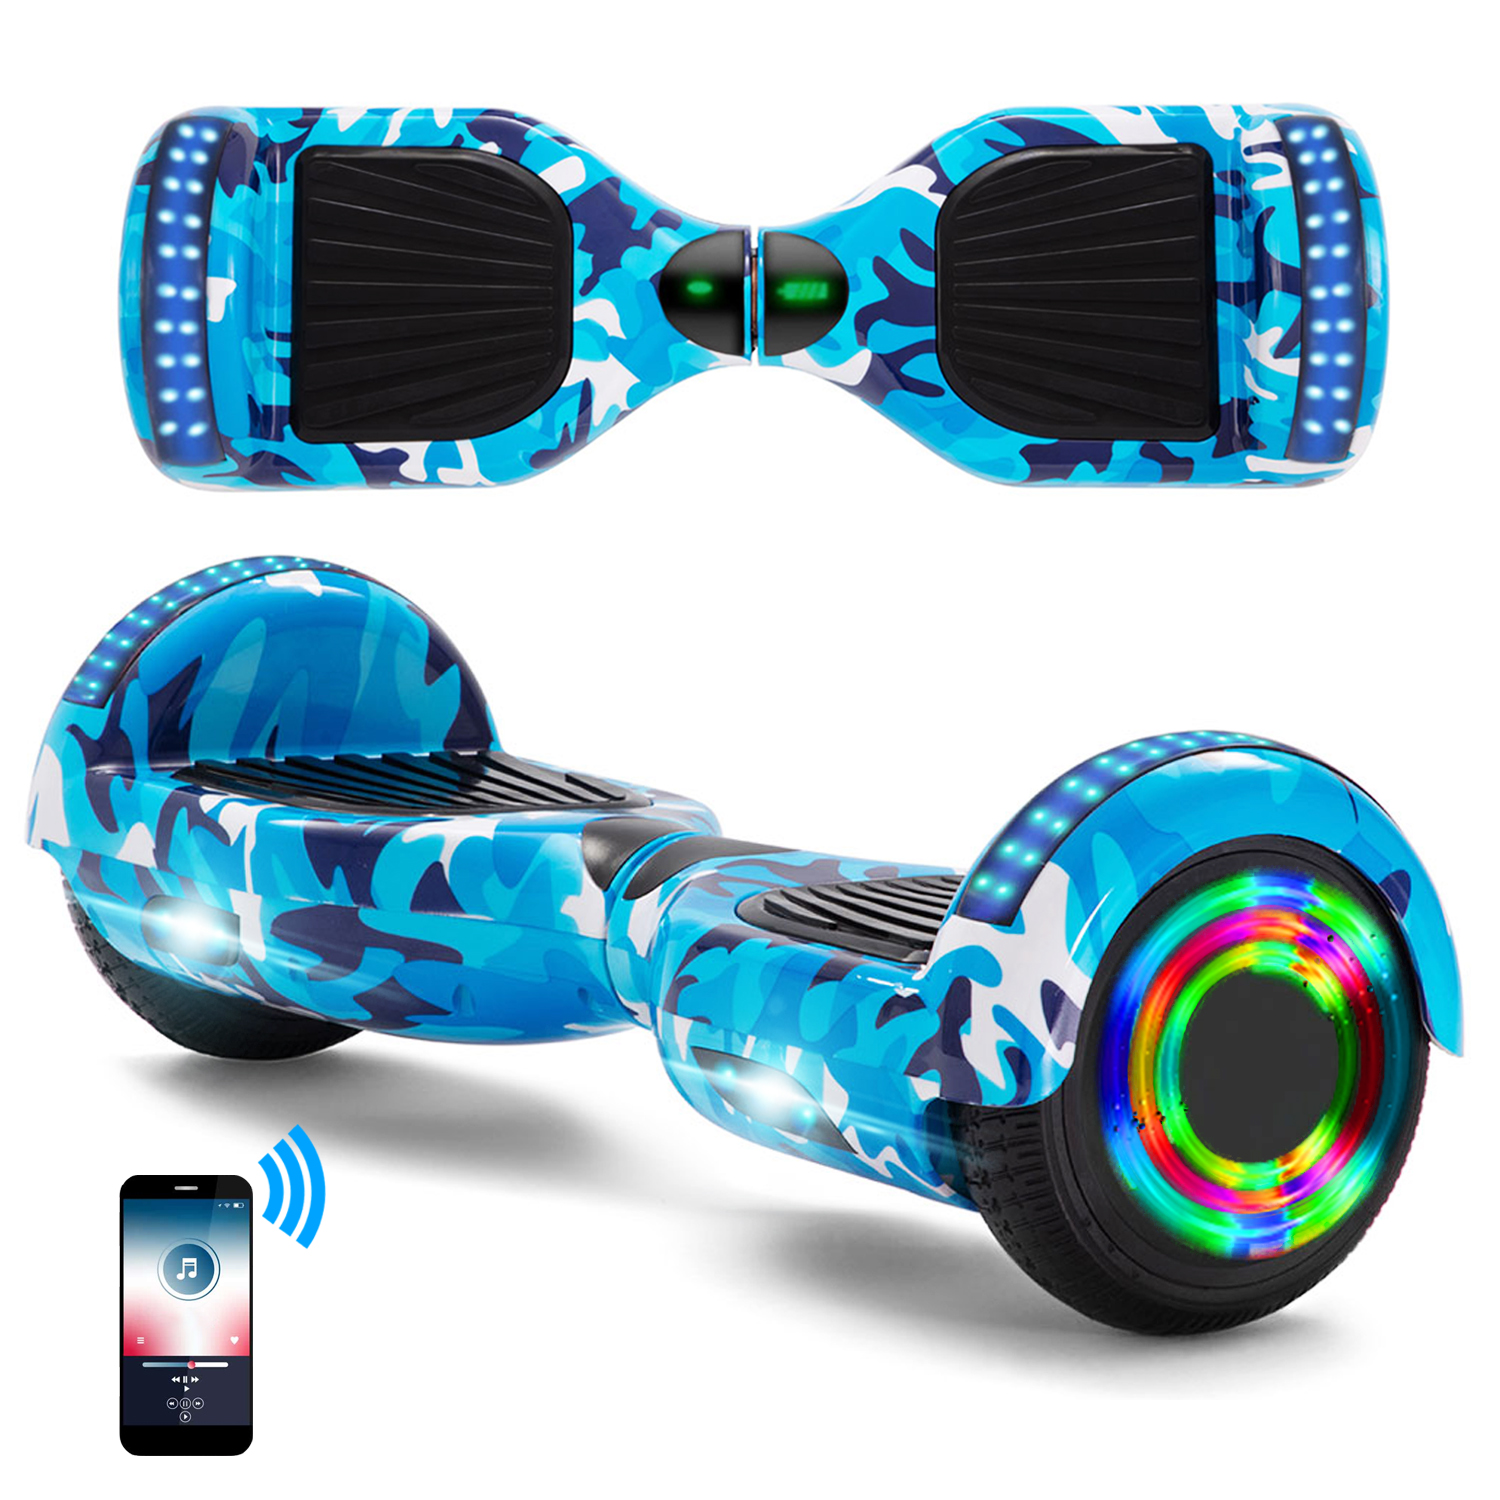 Hoverboard Für Kinder 6,5 Zoll Bluetooth Self-Balancing Scooters LED Selbst Balance Hover Board 500W Motor Hoverboards Mit Räder Lichter ; Flamme 